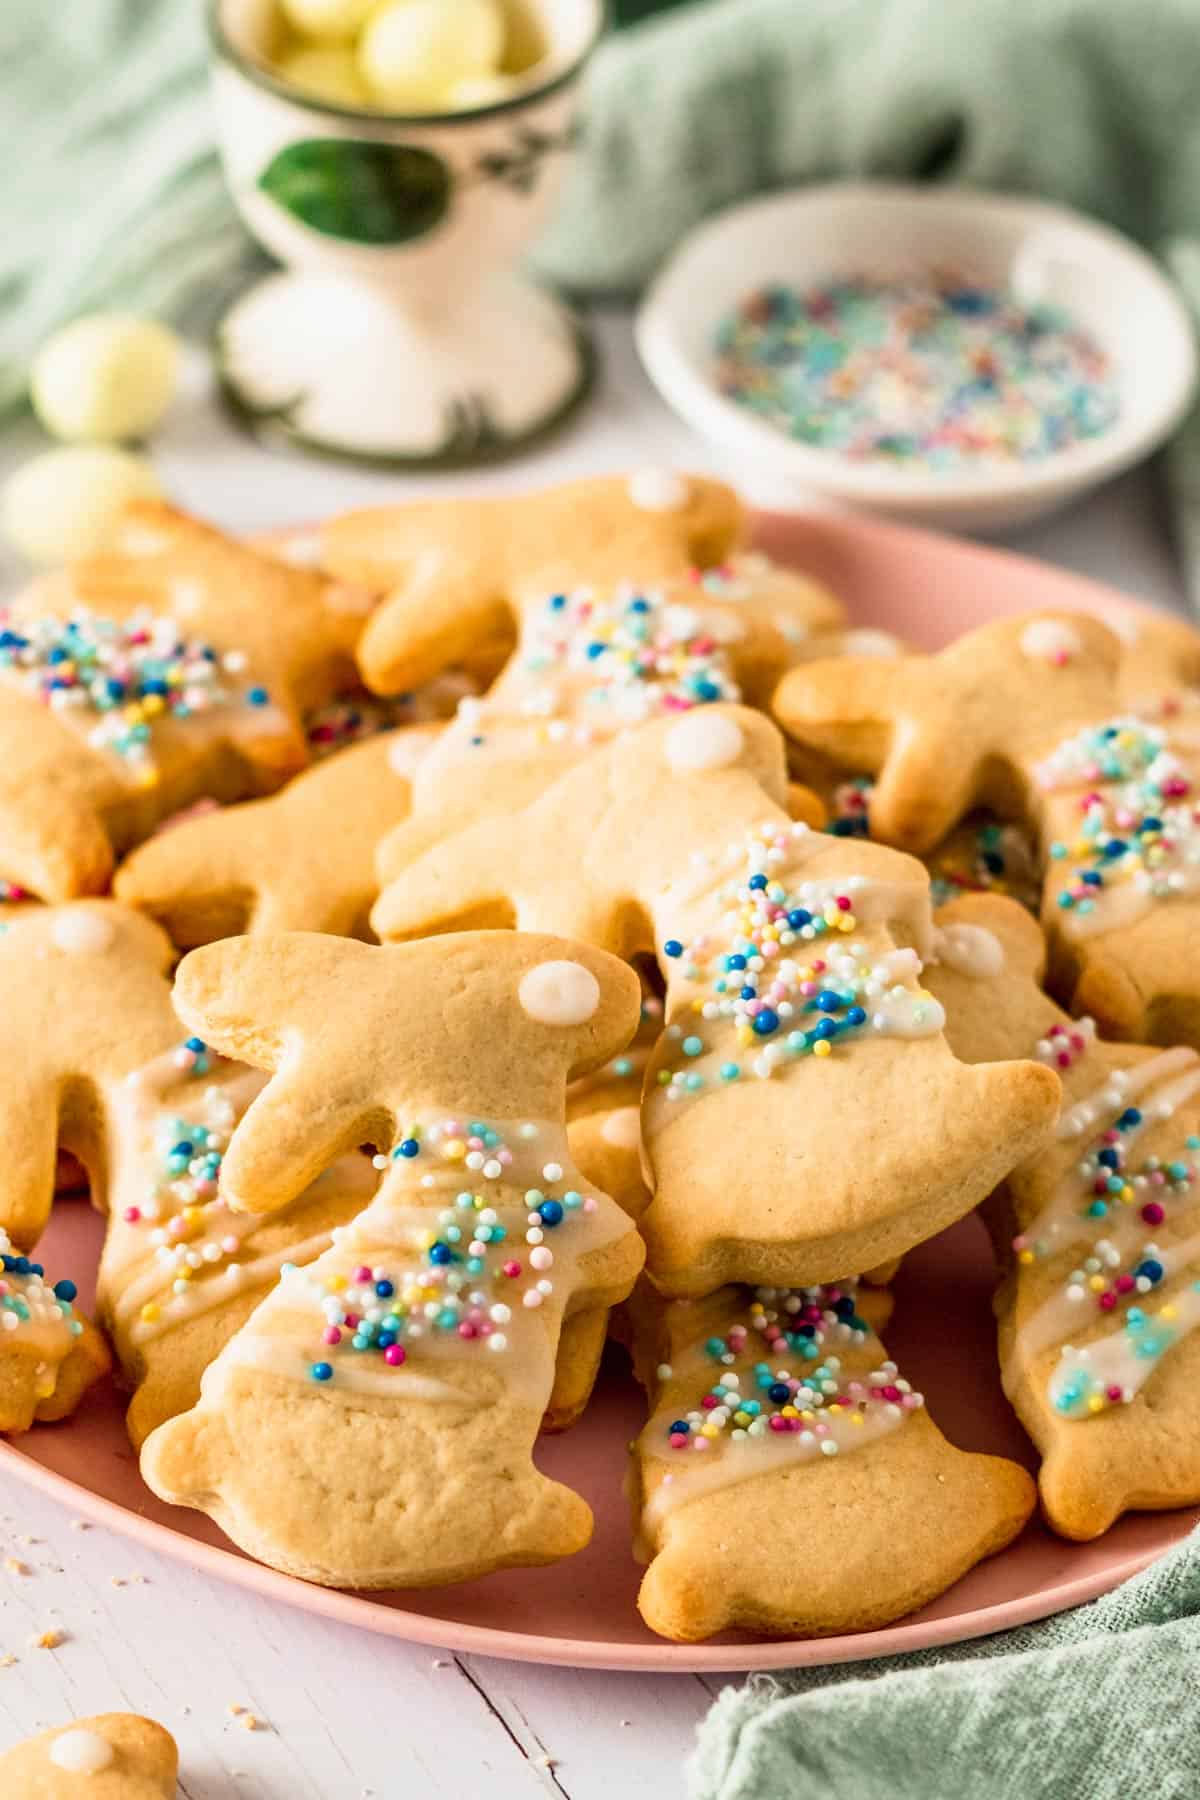 Bunny shaped sugar cookies with icing on a pink plate